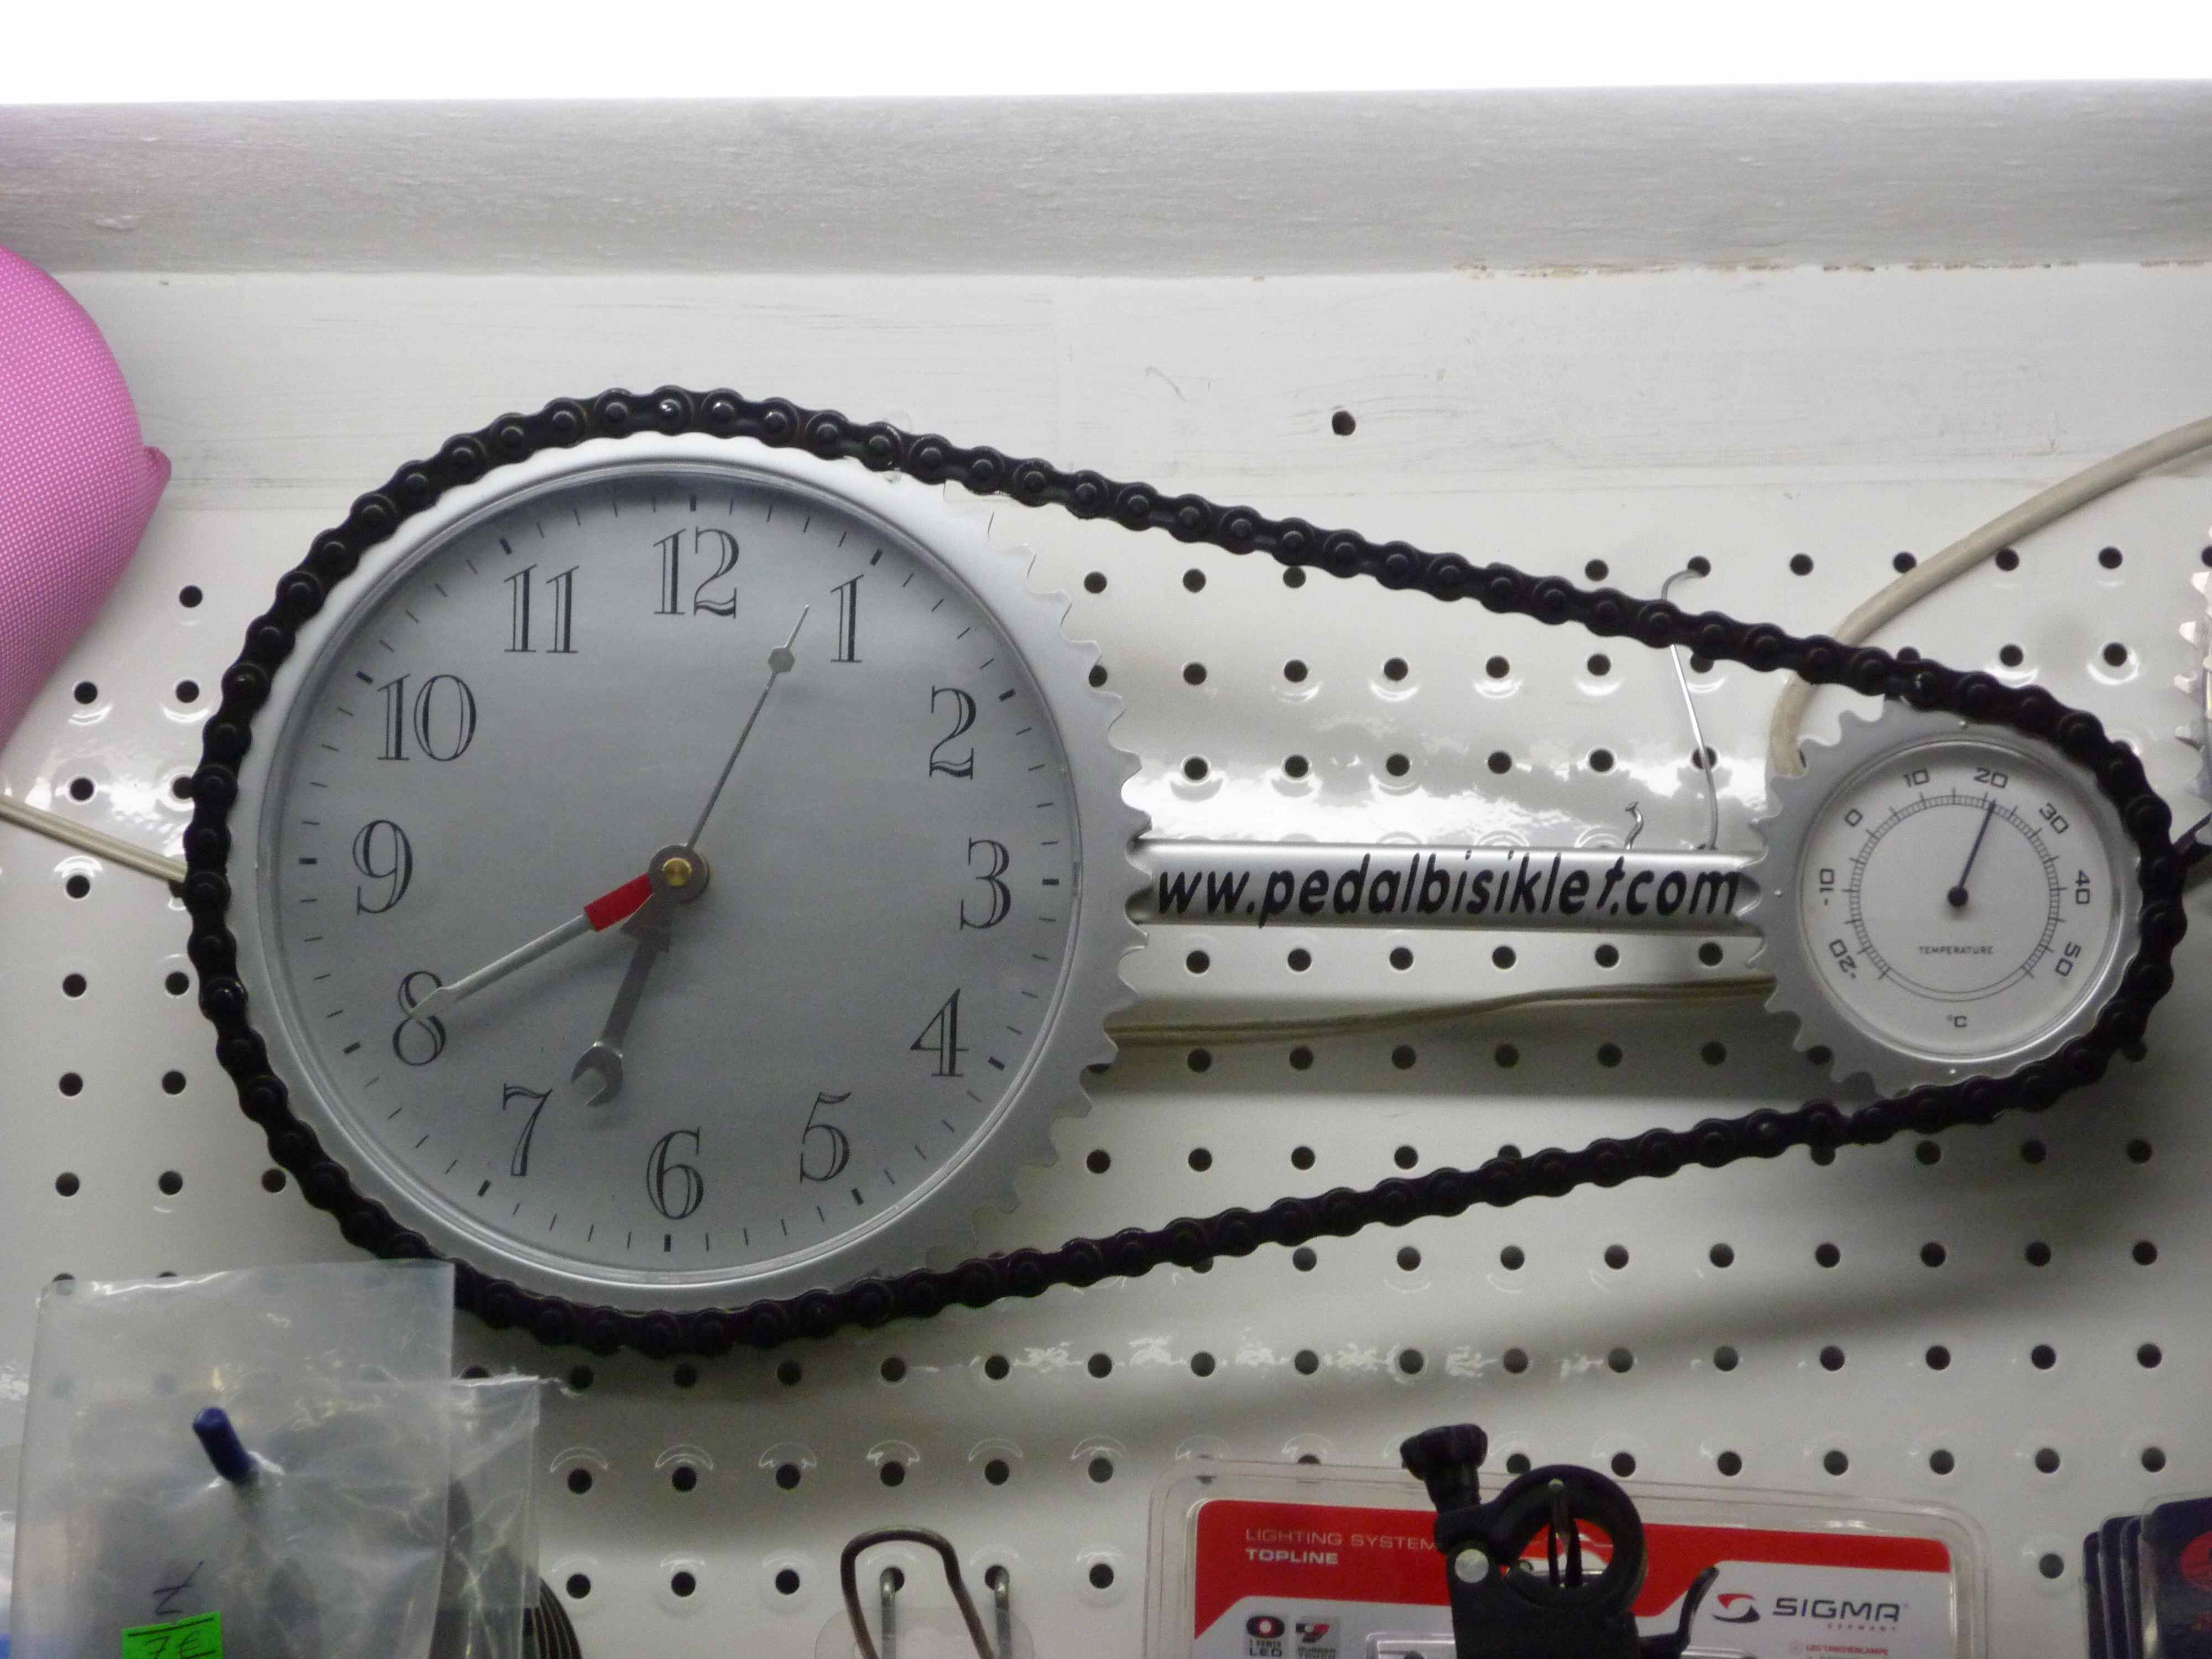 Any genuine bike shop should have a clock like this :-)